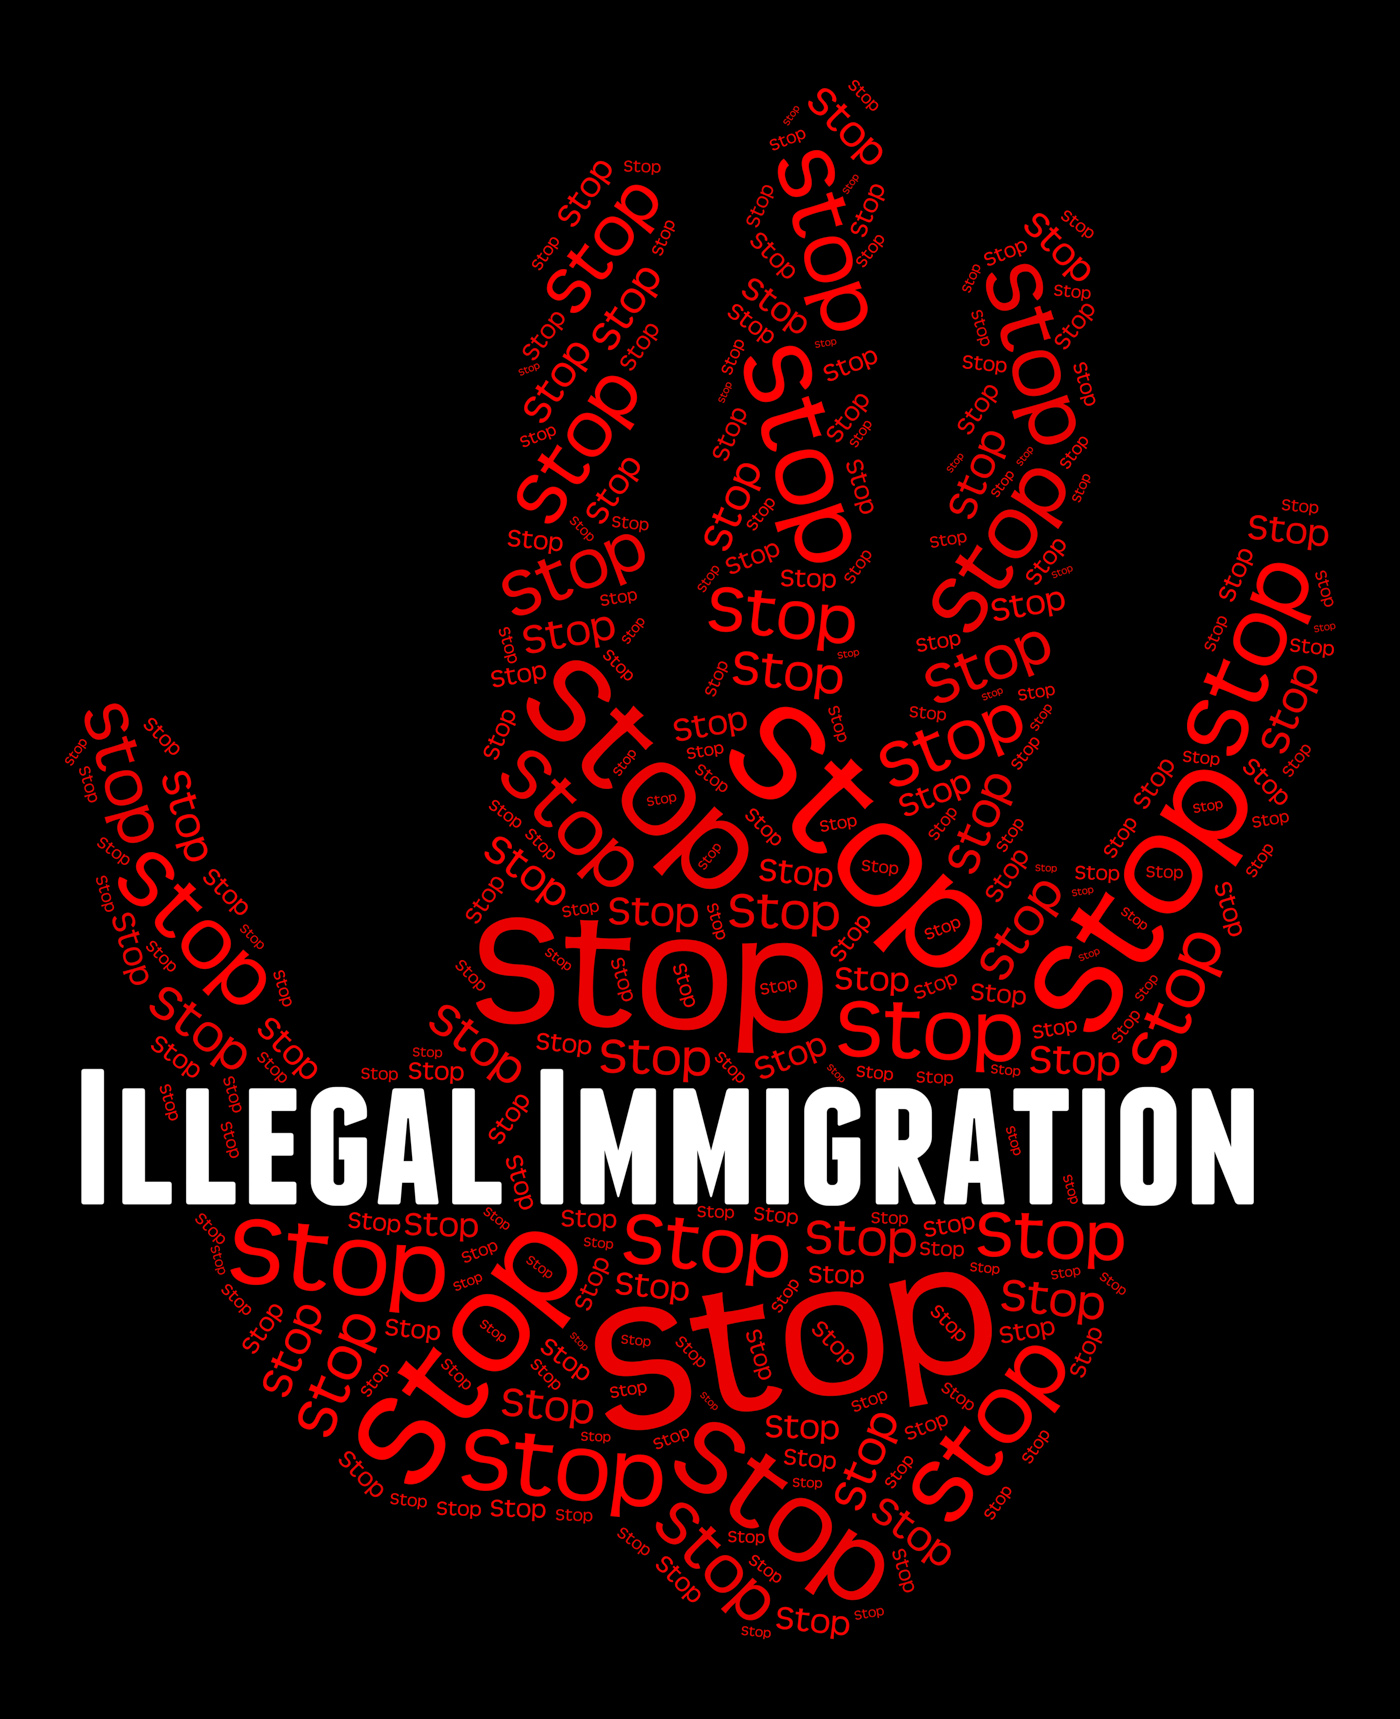 Stop illegal immigration indicates against the law and immigrant photo